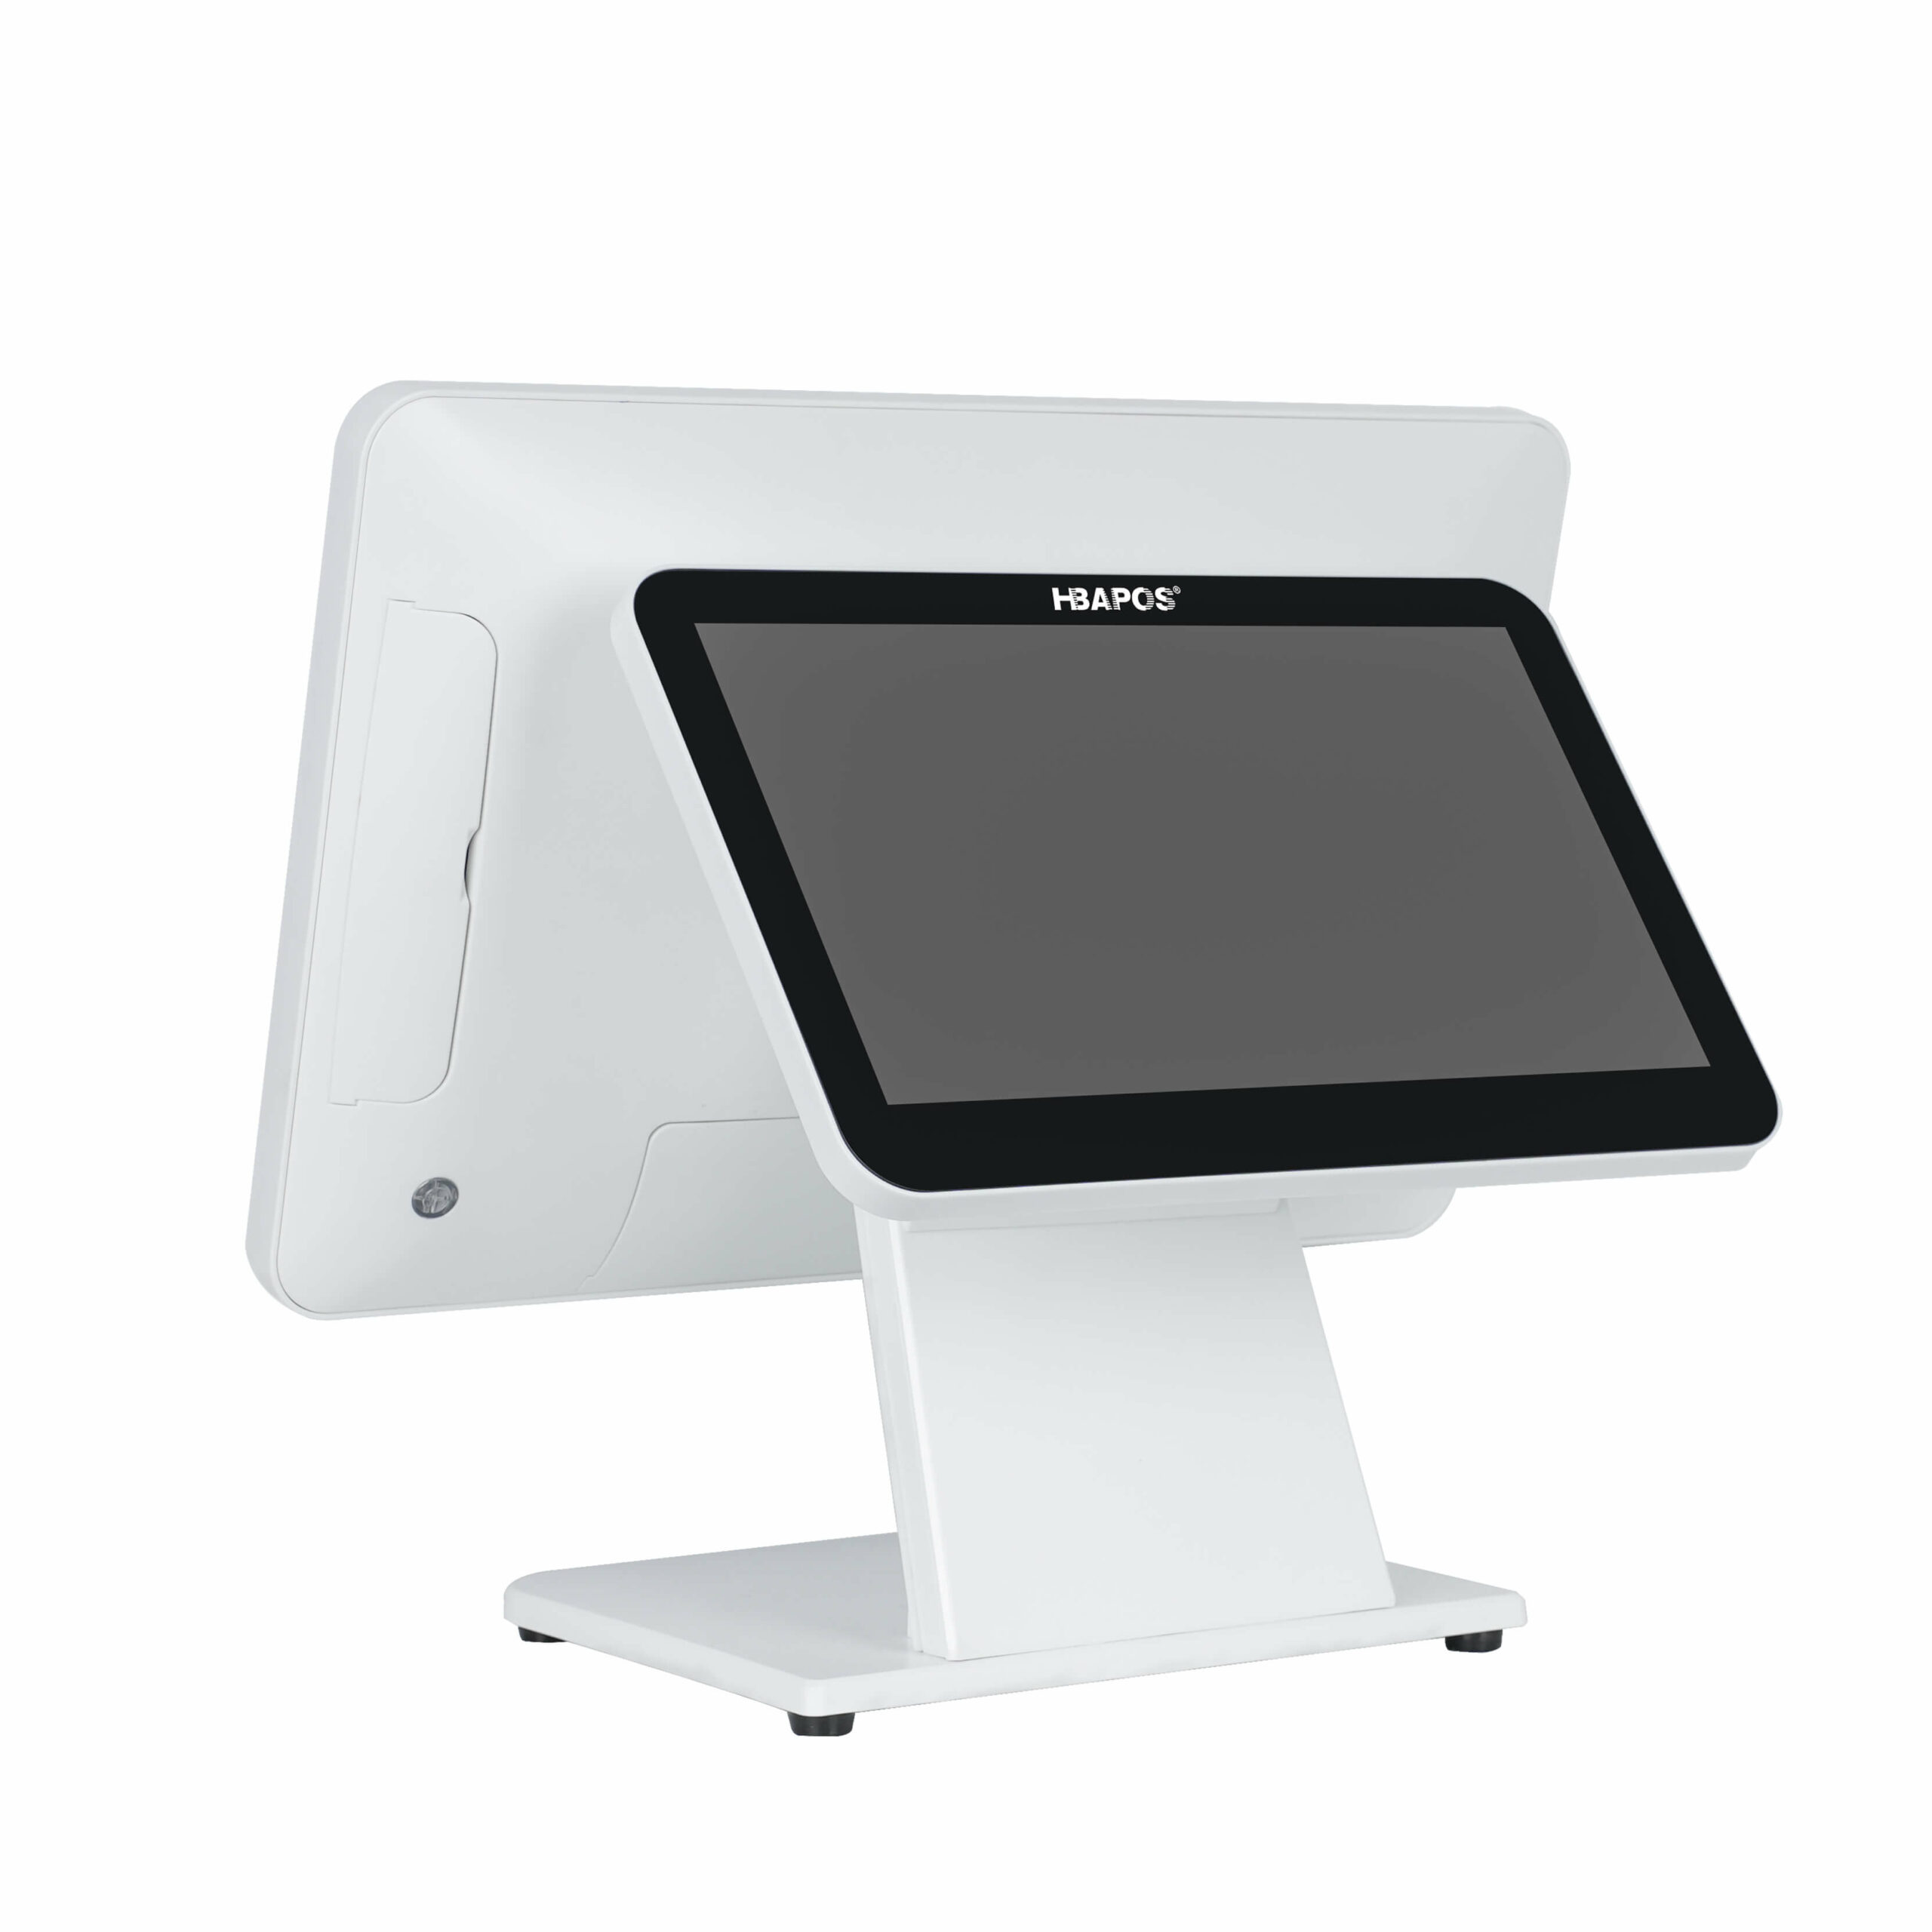 HBA-GM10 whithe 15.6 inch Front 1920×1080p Touch Capacitive Screen Pos System